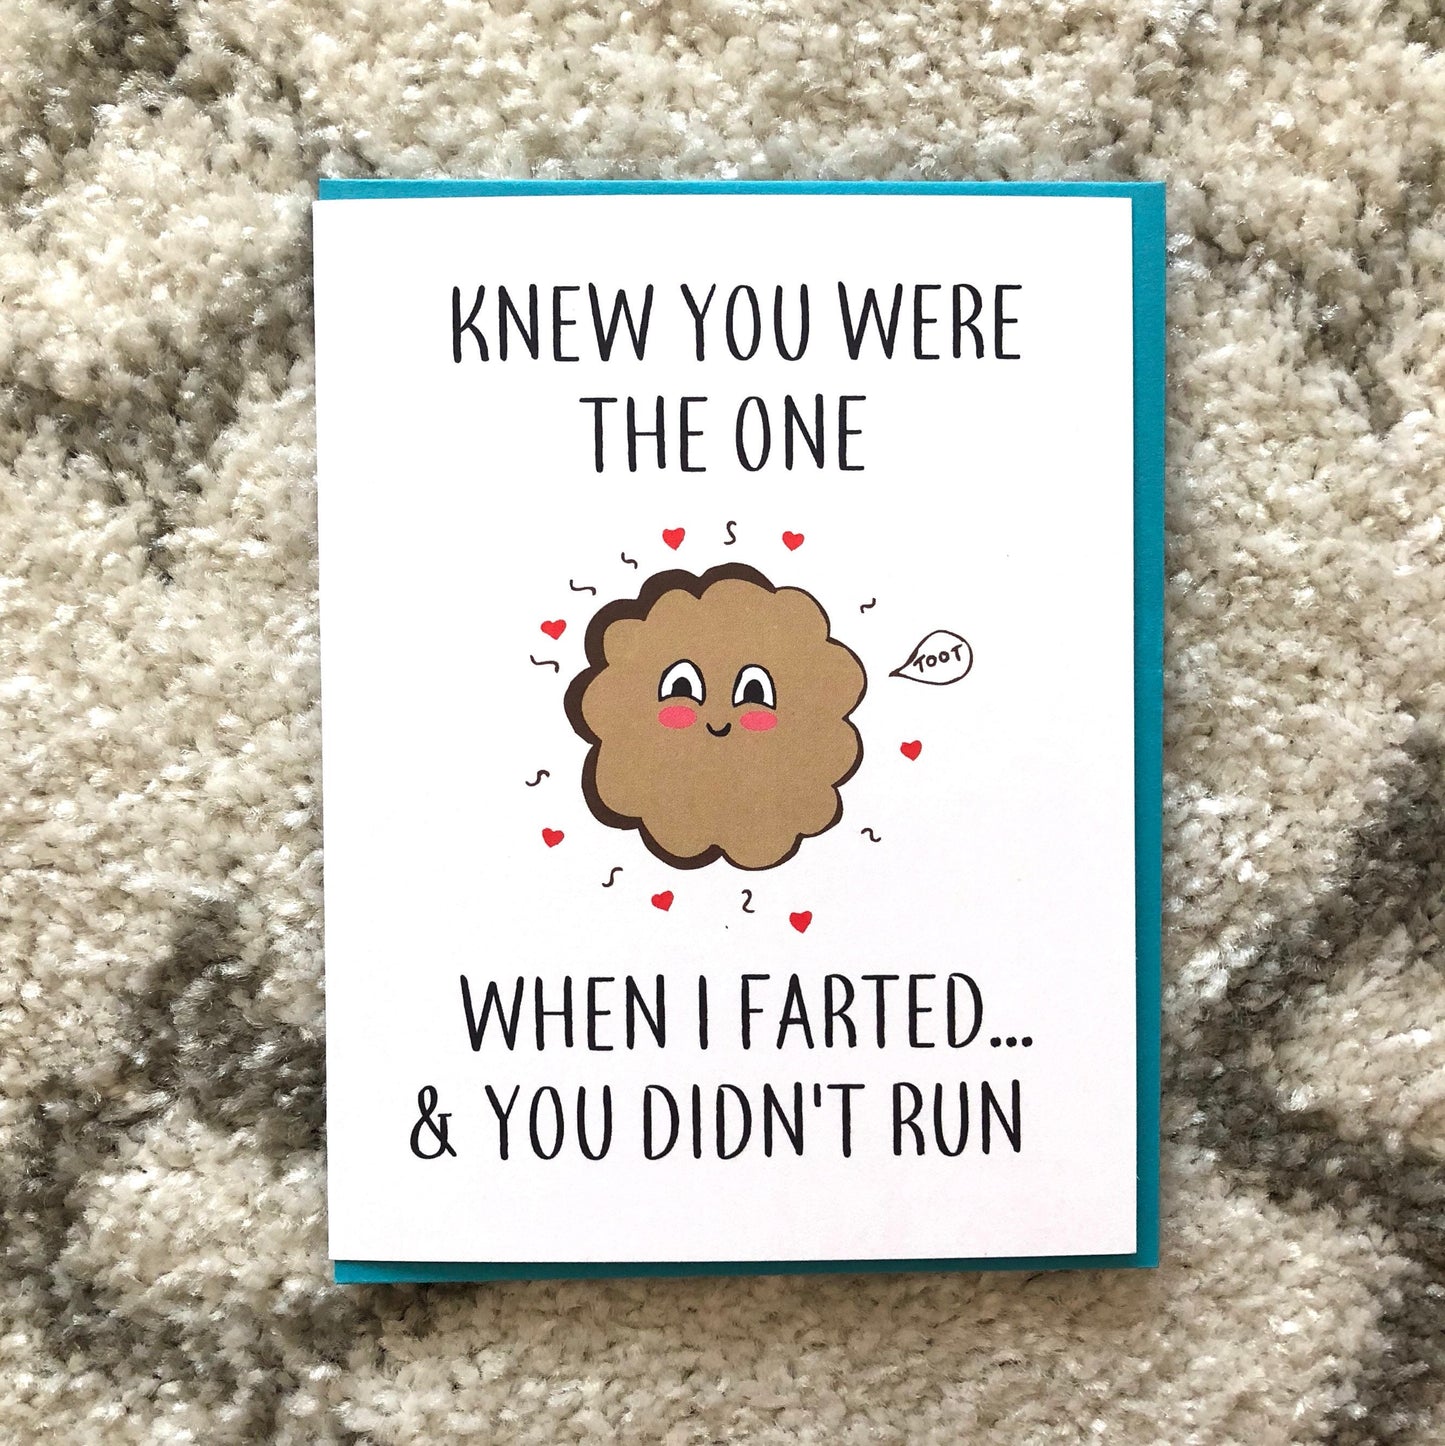 Knew You Were the One Fart Card - Toot Love Card, Funny Anniversary Card